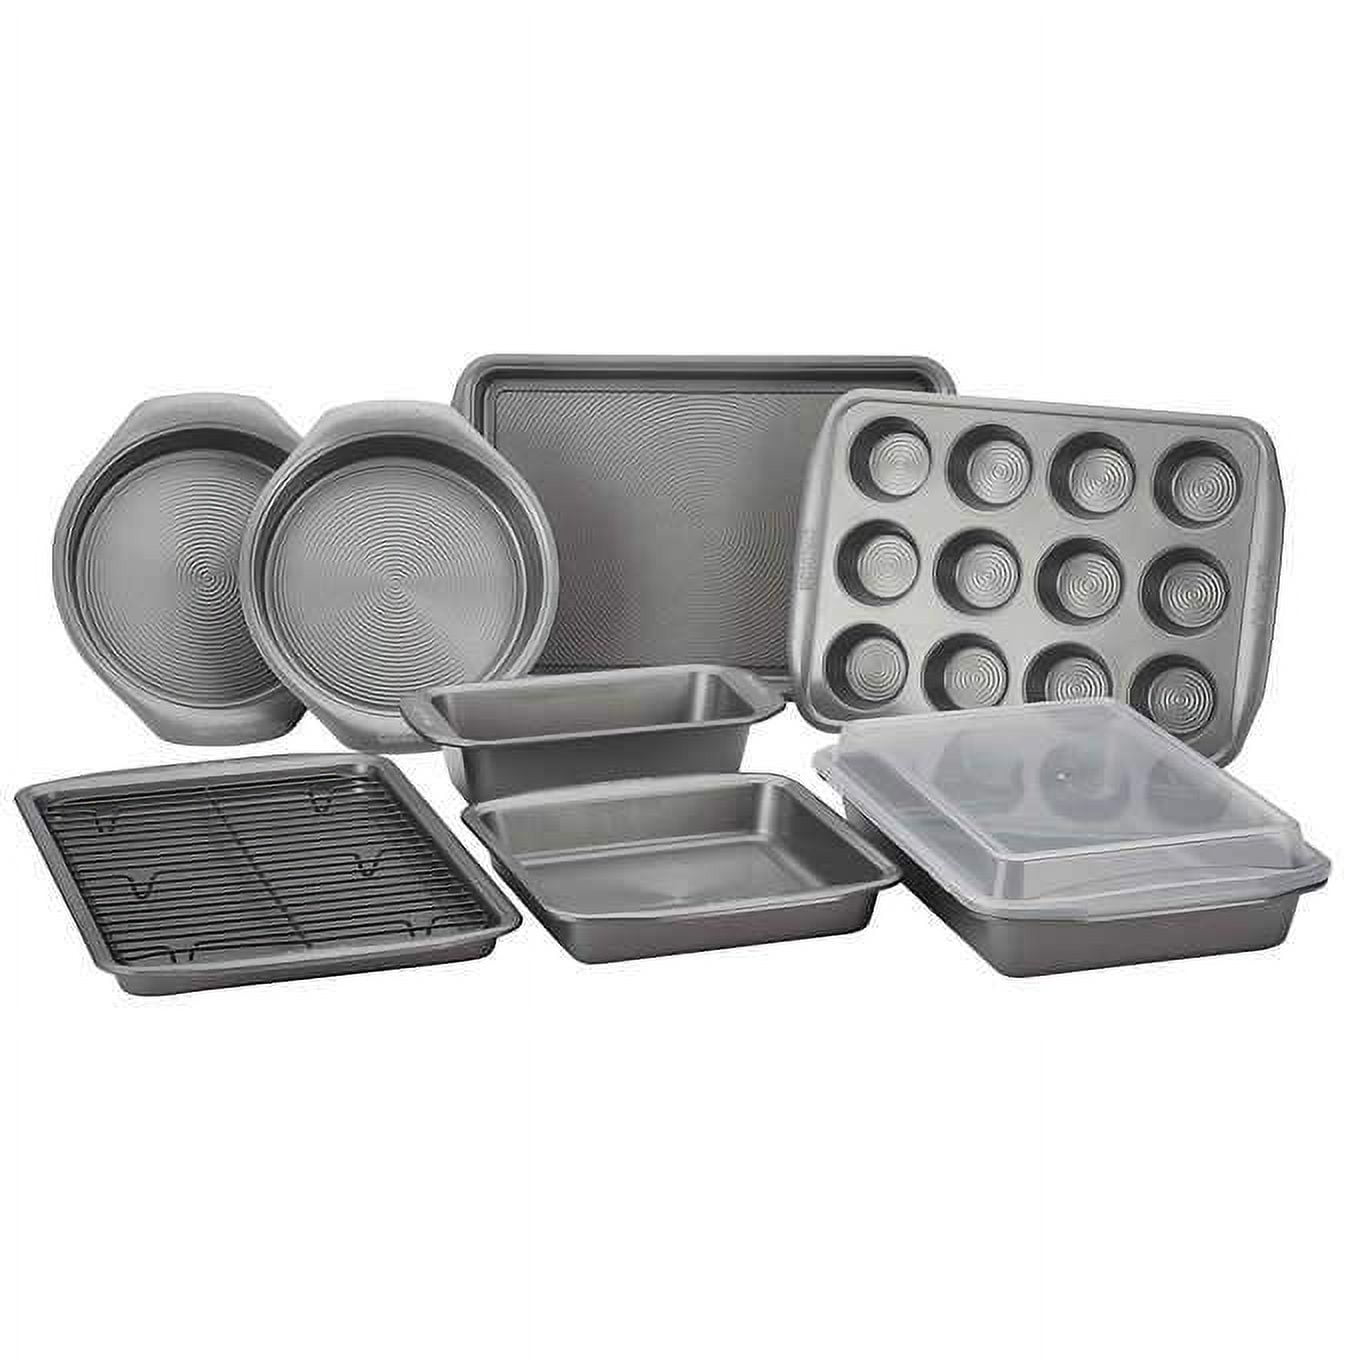 Circulon 47110 Nonstick Bakeware Set with Cookie and Cake Pans 3 Piece  Chocolate